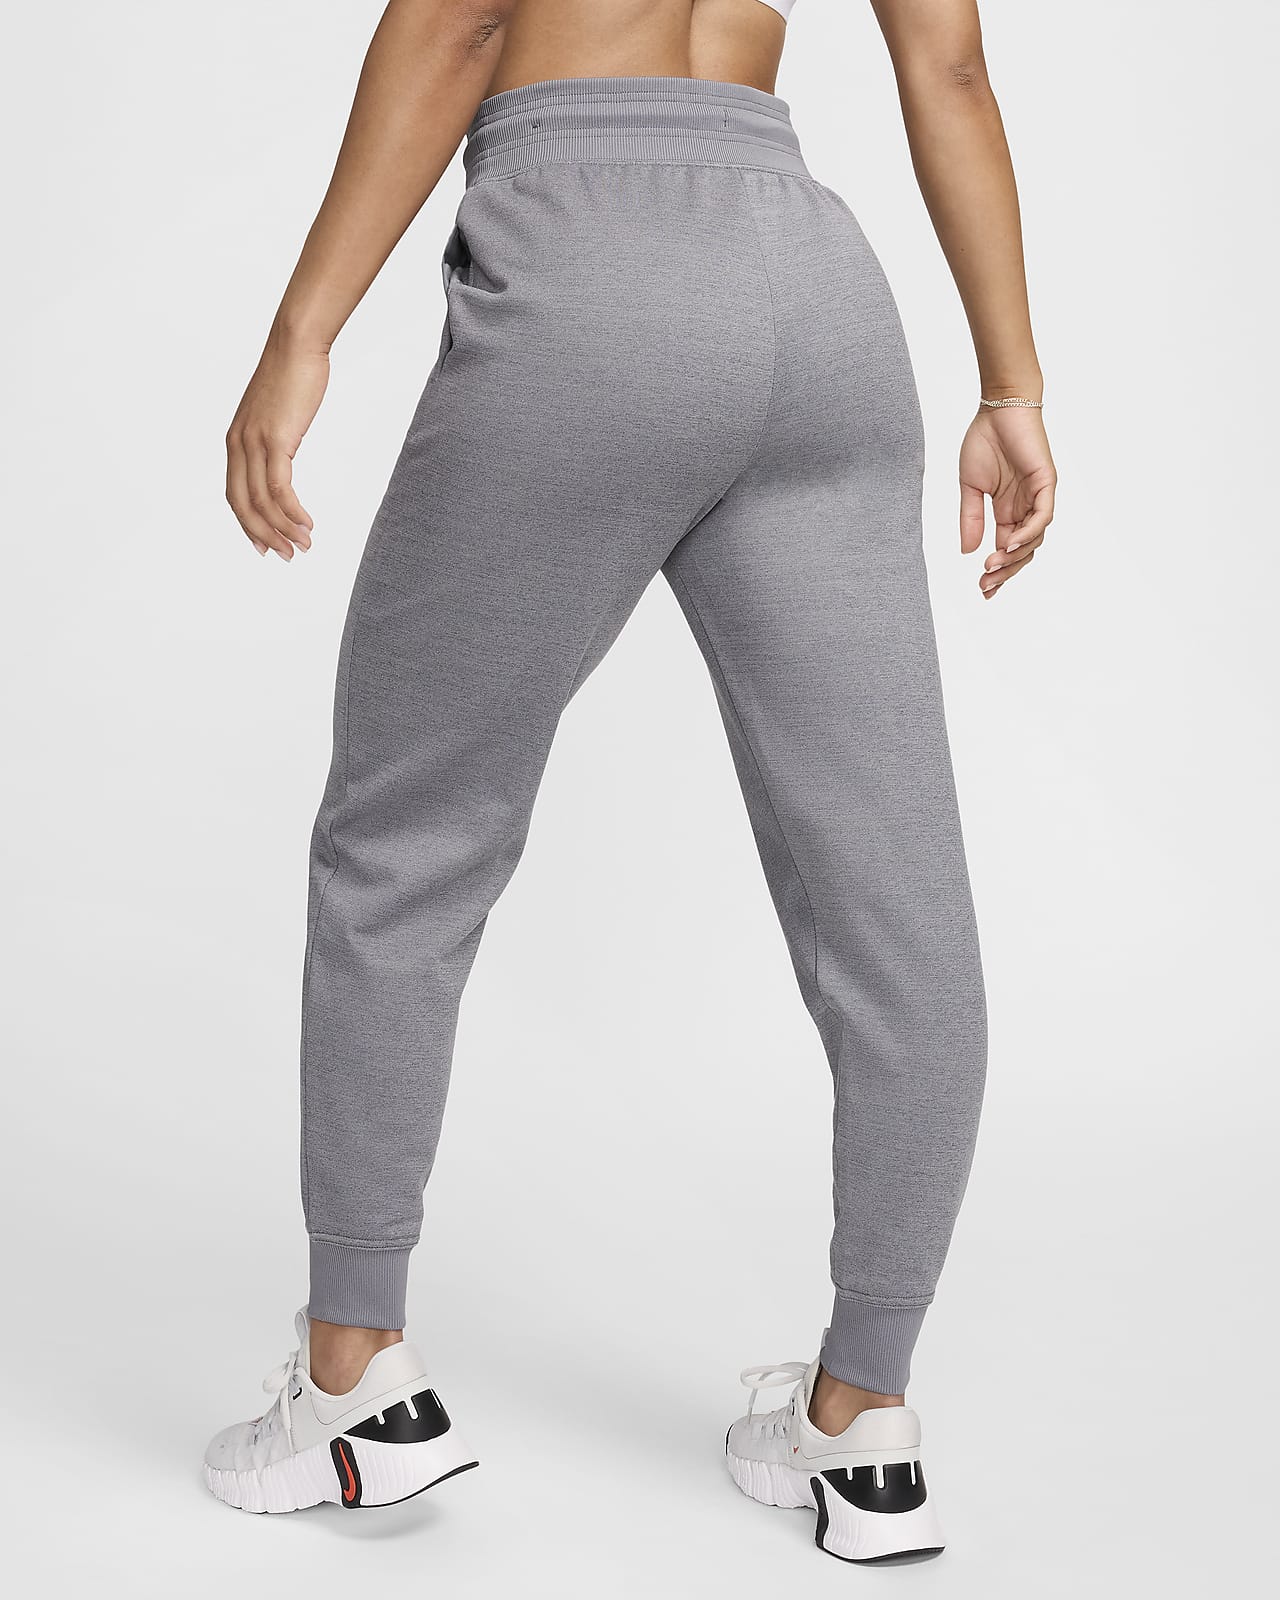 Buy Nike Therma-fit One High-waisted 7/8 Leggings - Grey At 38% Off